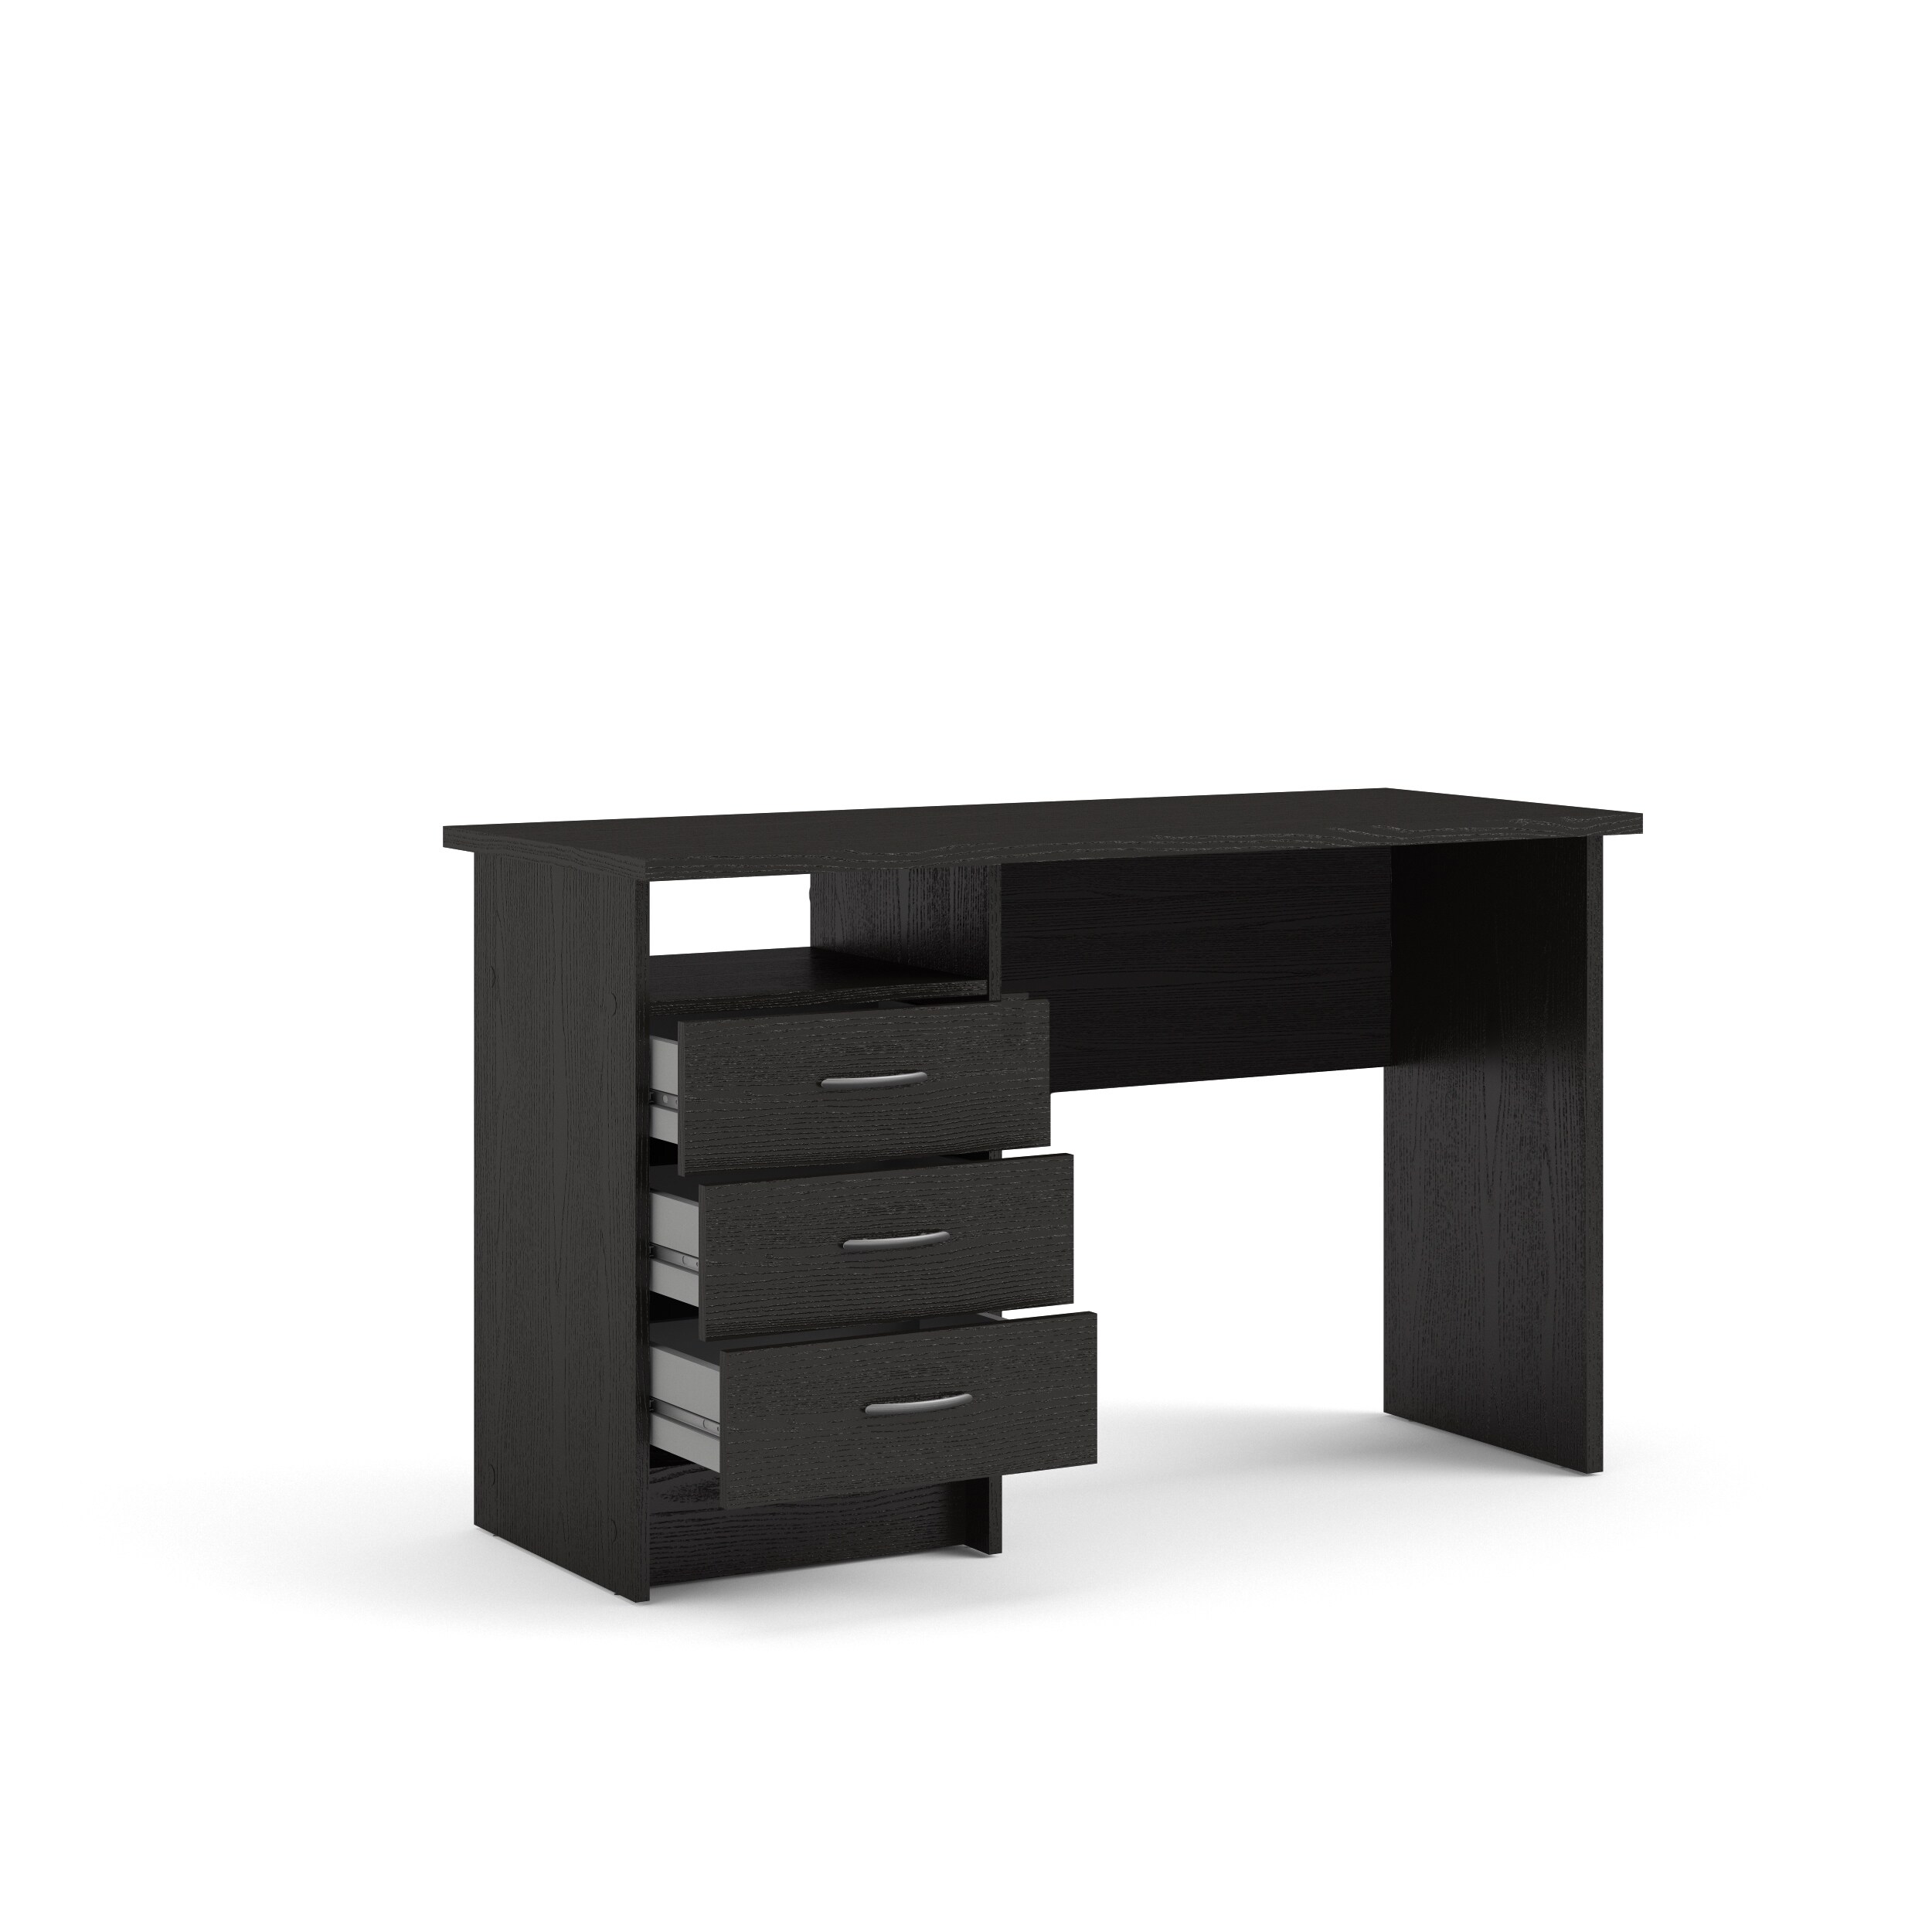 https://ak1.ostkcdn.com/images/products/is/images/direct/c46c4e5969f0b4619e76d04b4d3f9174cf819b98/Porch-%26-Den-Skylar-Desk-with-3-Drawers.jpg